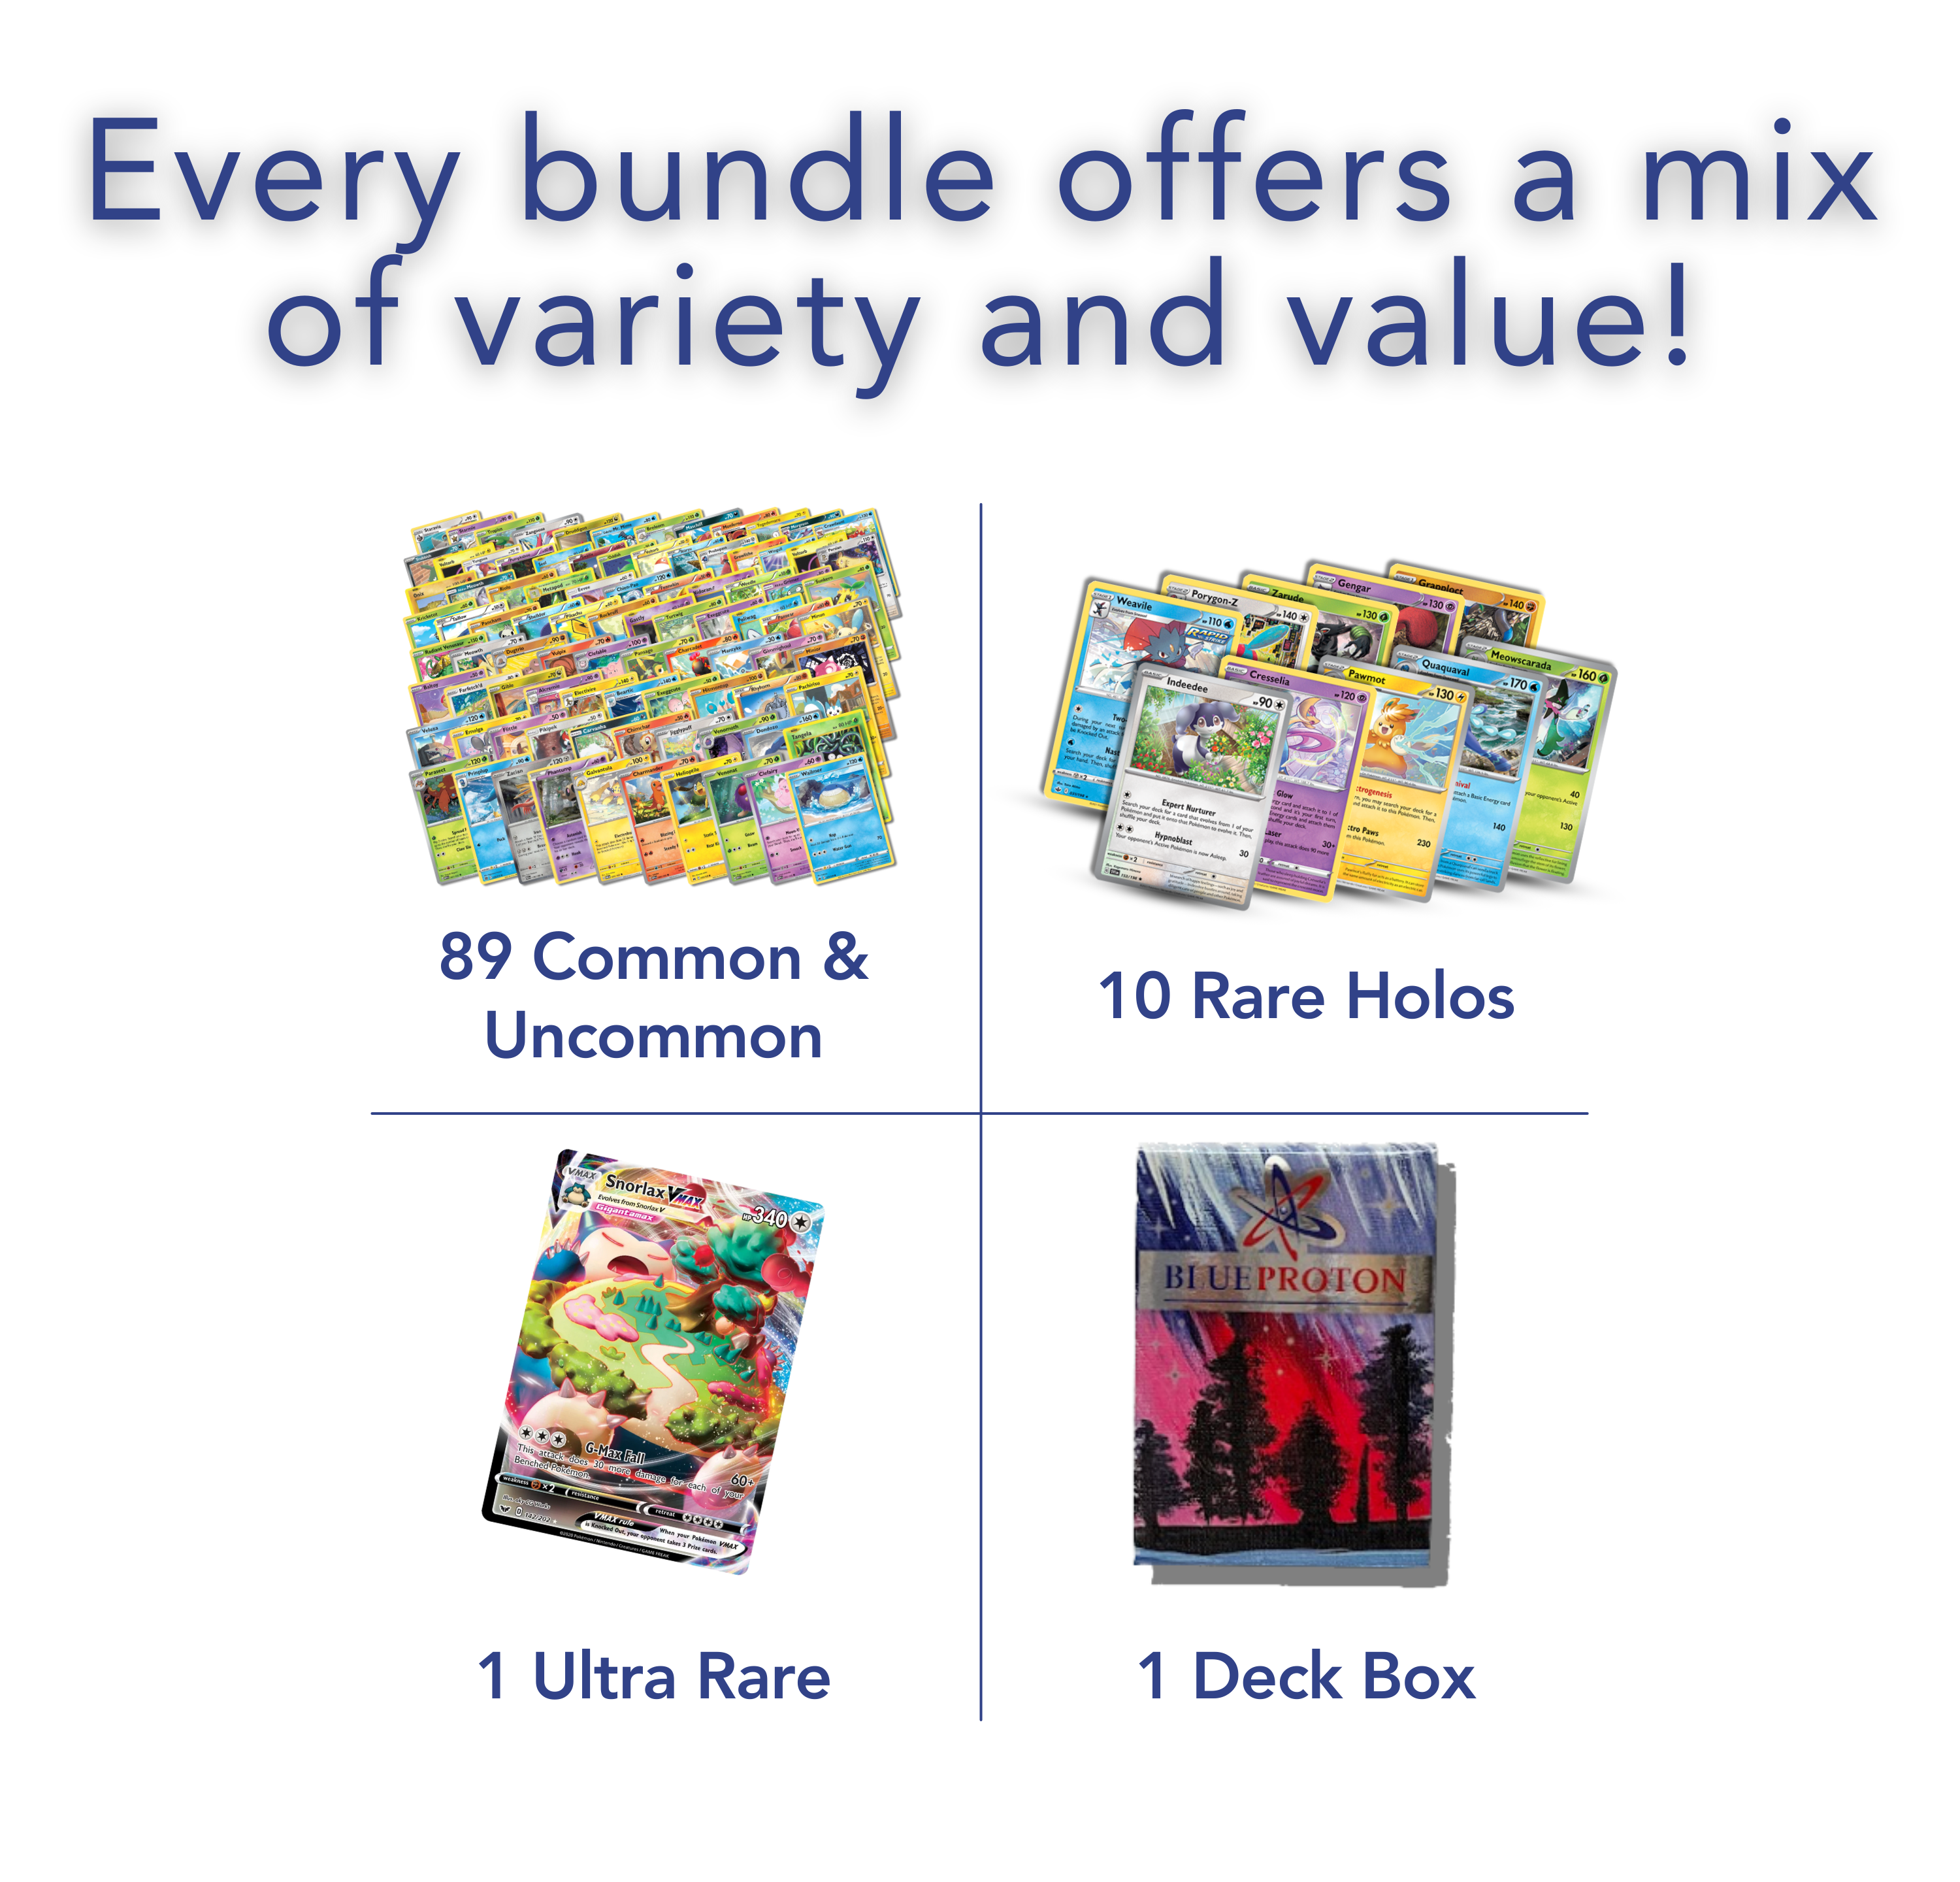 Exclusive Ultimate Bundle | 100 Genuine Cards | Includes 1 Guaranteed Ultra Rare: Legendary, VSTAR, VMAX, V, GX, or EX | Plus 10 Holos or Rares | BlueProton Deck Box compatible with trading cards